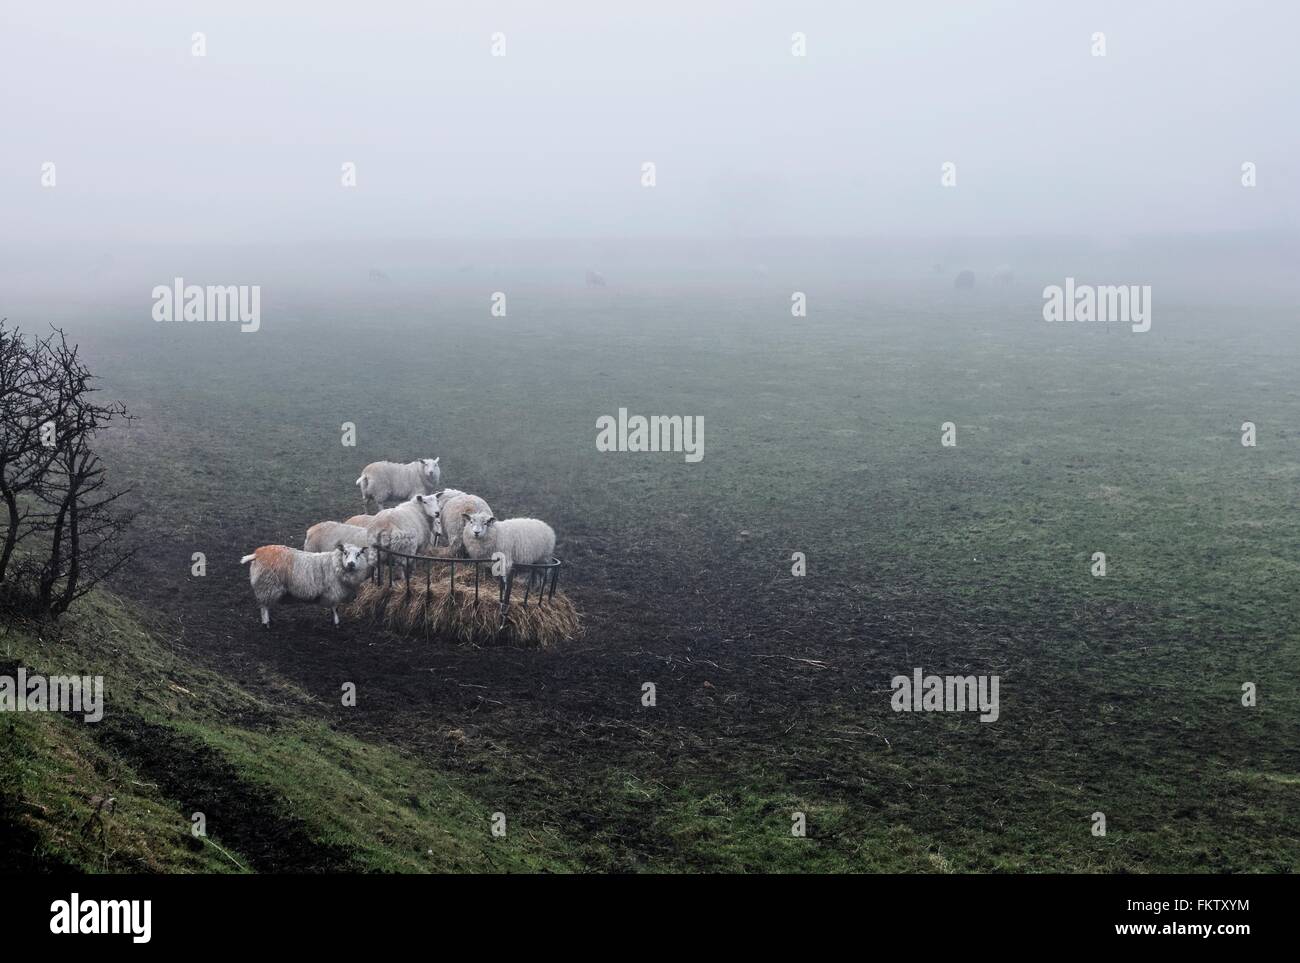 Sheep in misty countryside landscape Stock Photo